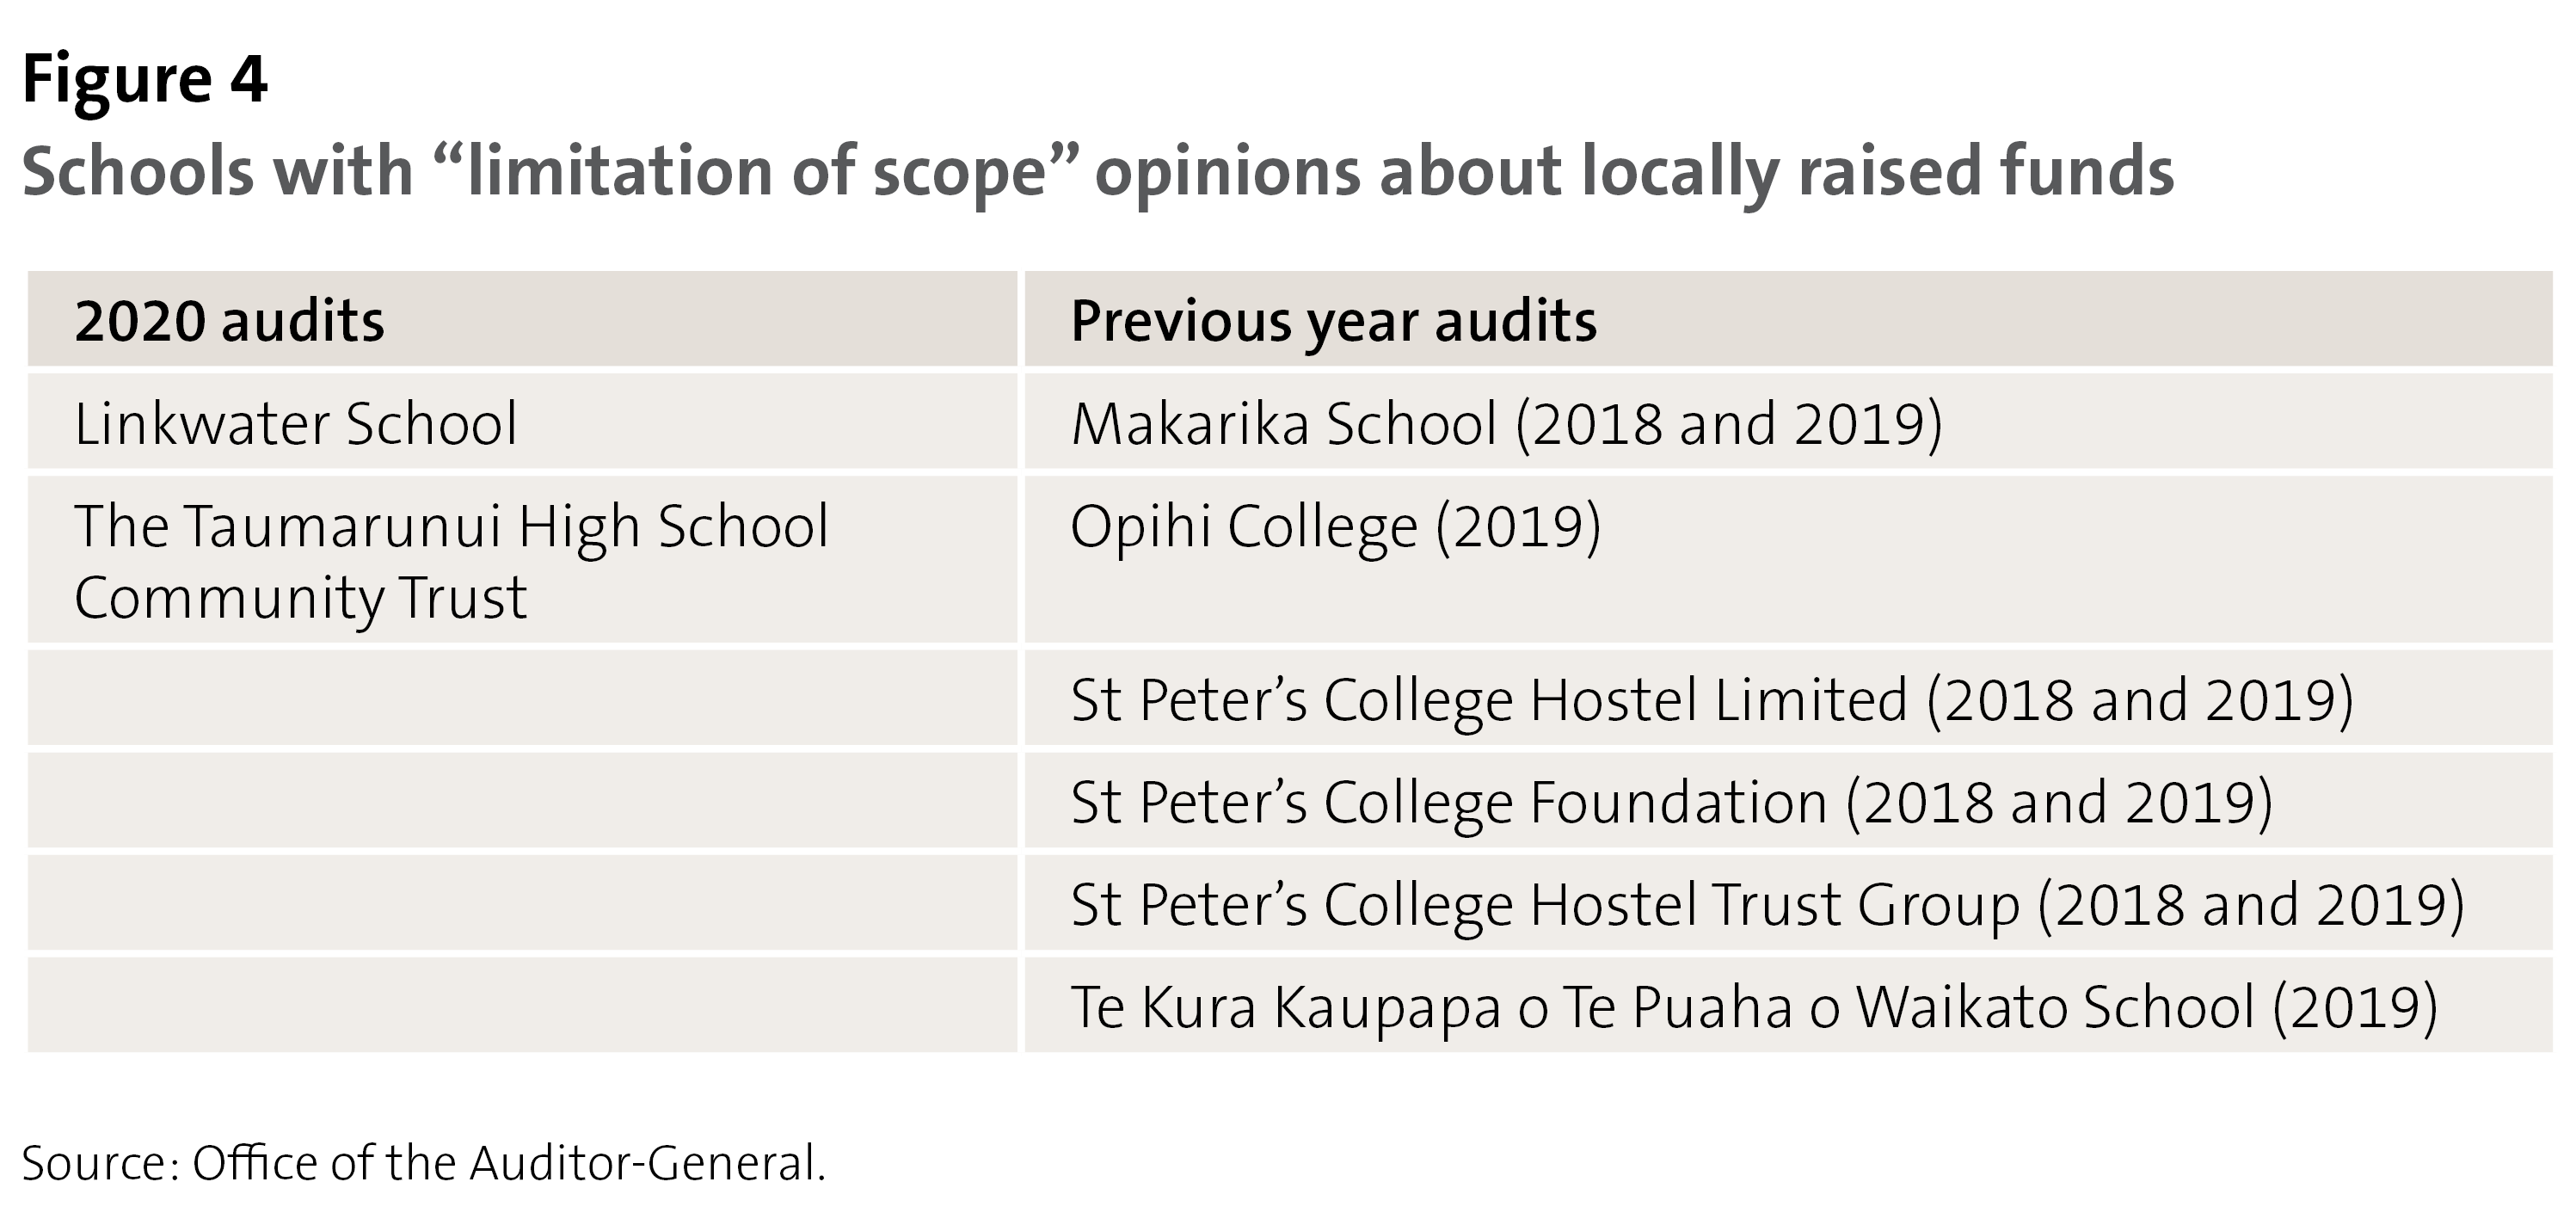 Figure 4 - Schools with “limitation of scope” opinions about locally raised funds